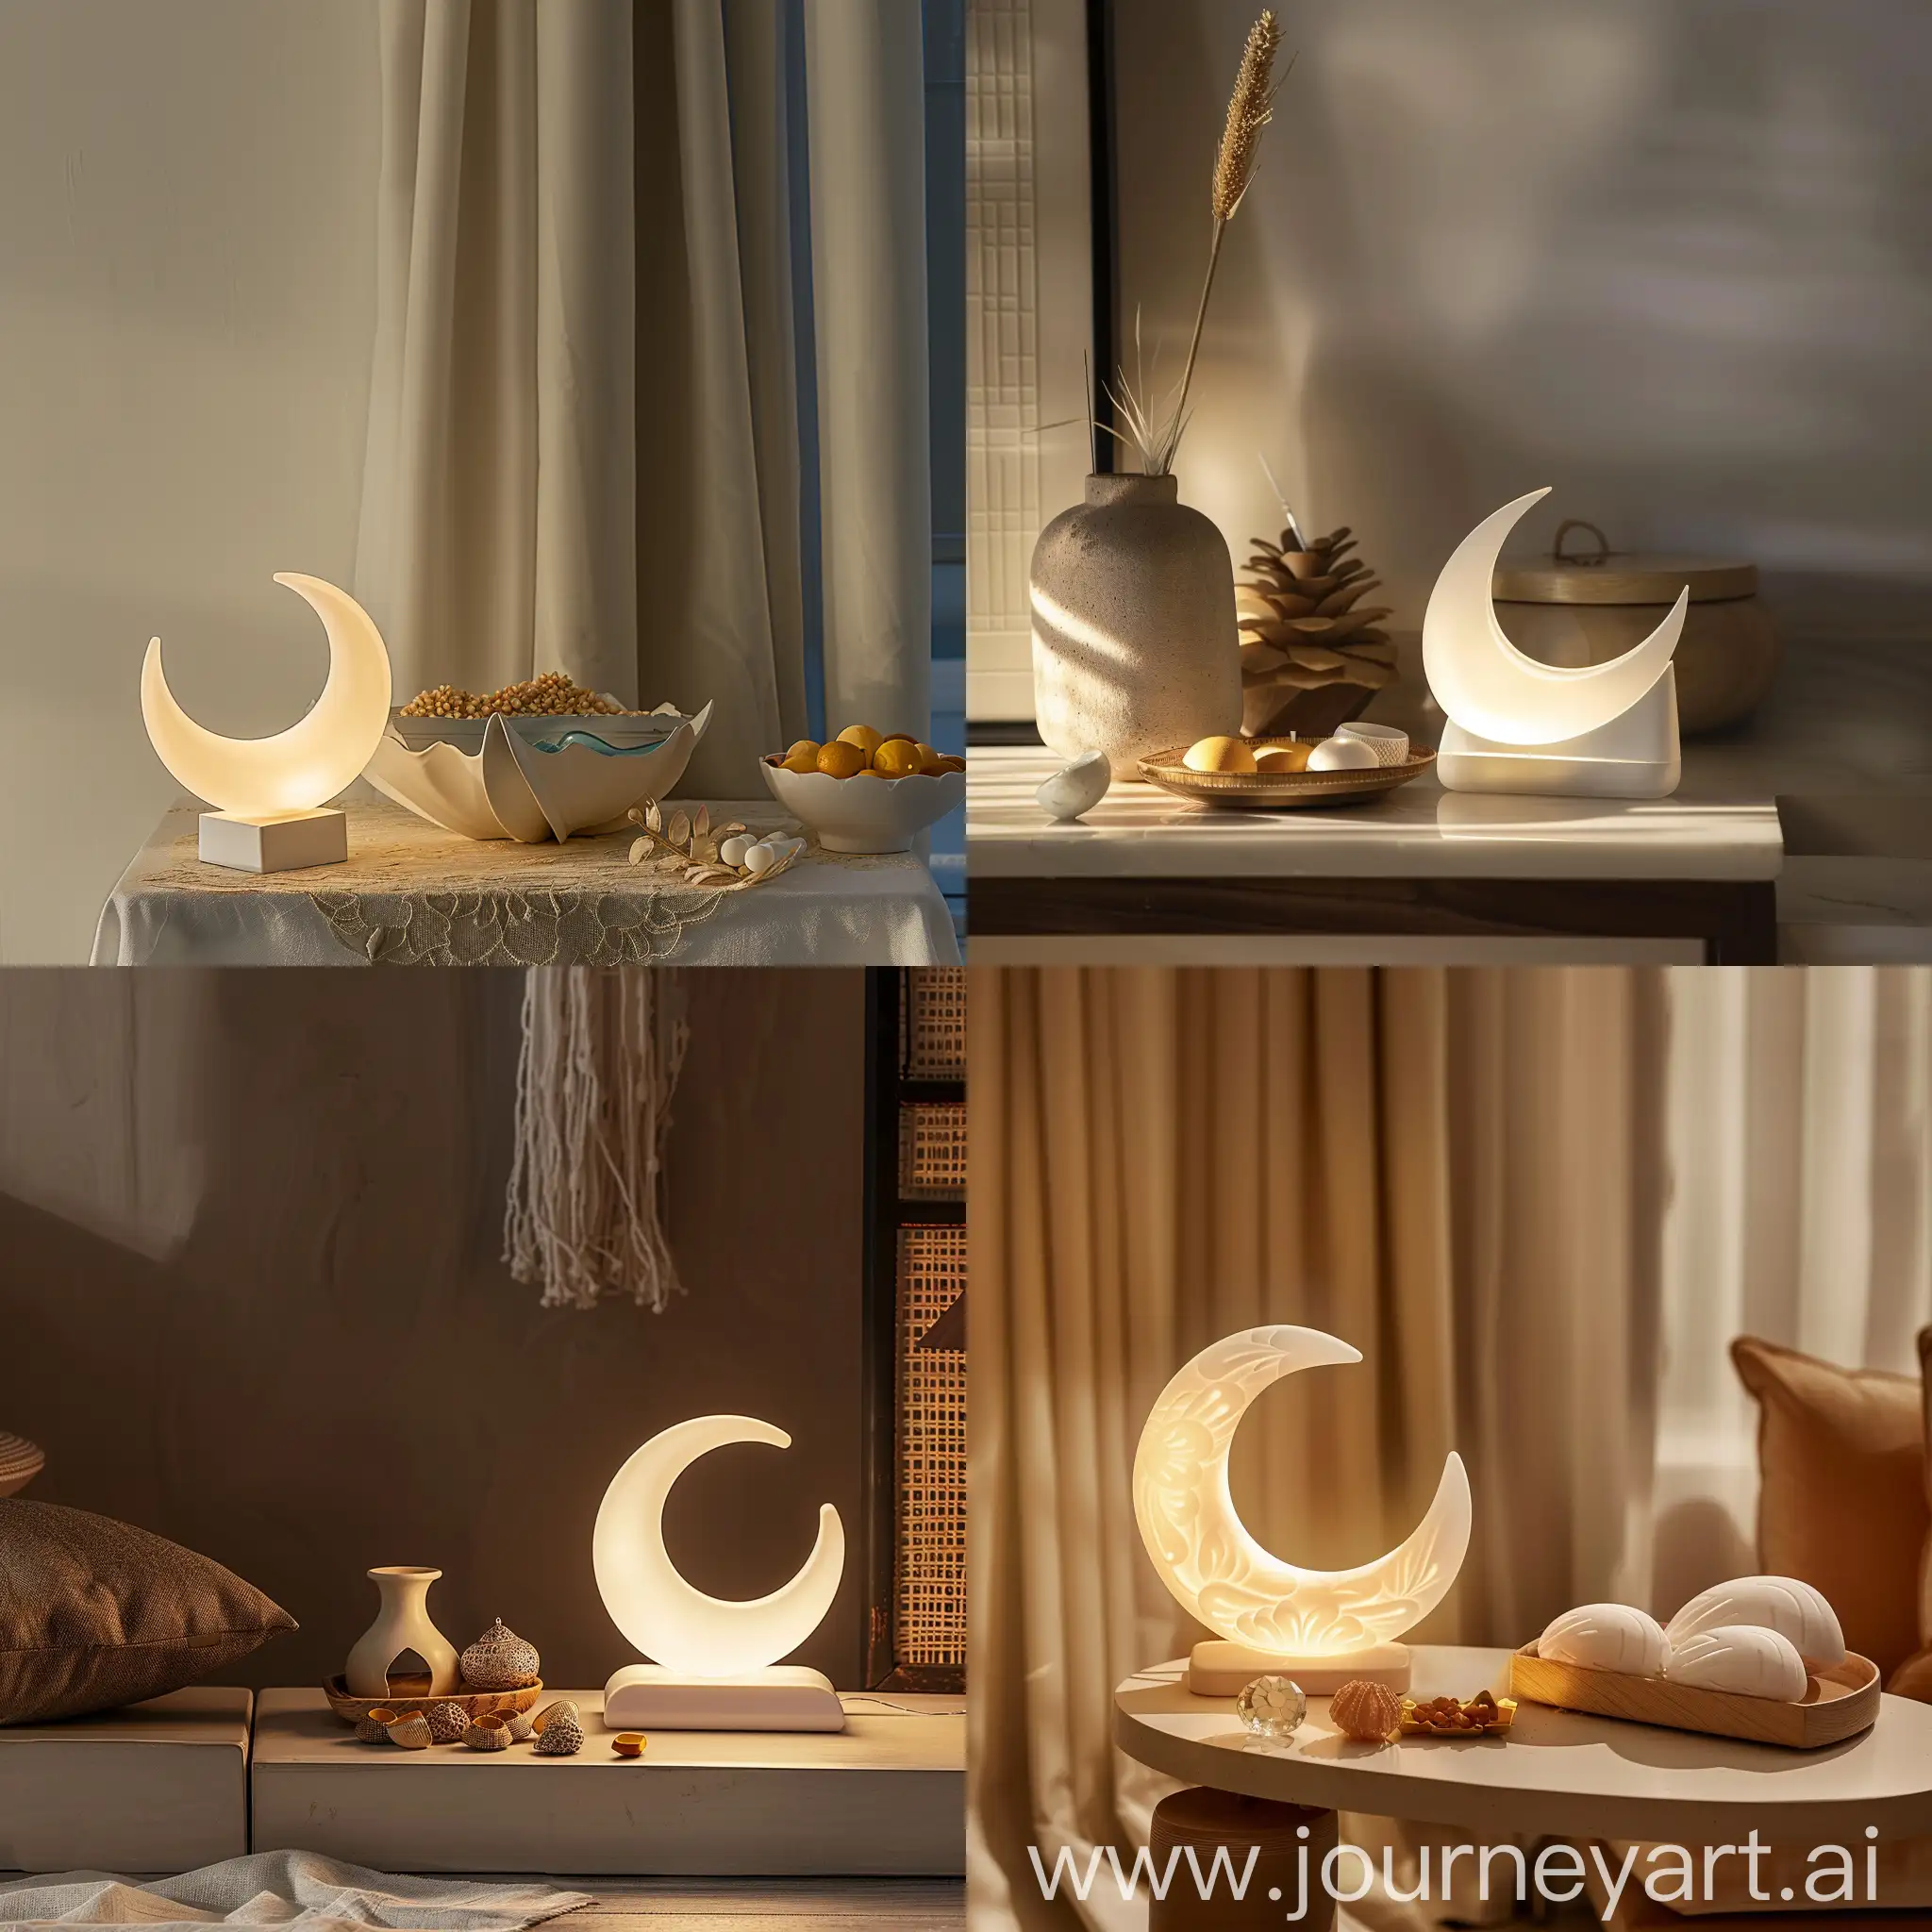 Designing an interior scene in the atmosphere of the month of Ramadan. A table containing a small lighting unit in the shape of a luminous crescent in white. There are some decorative accessories for the month of Ramadan next to it.